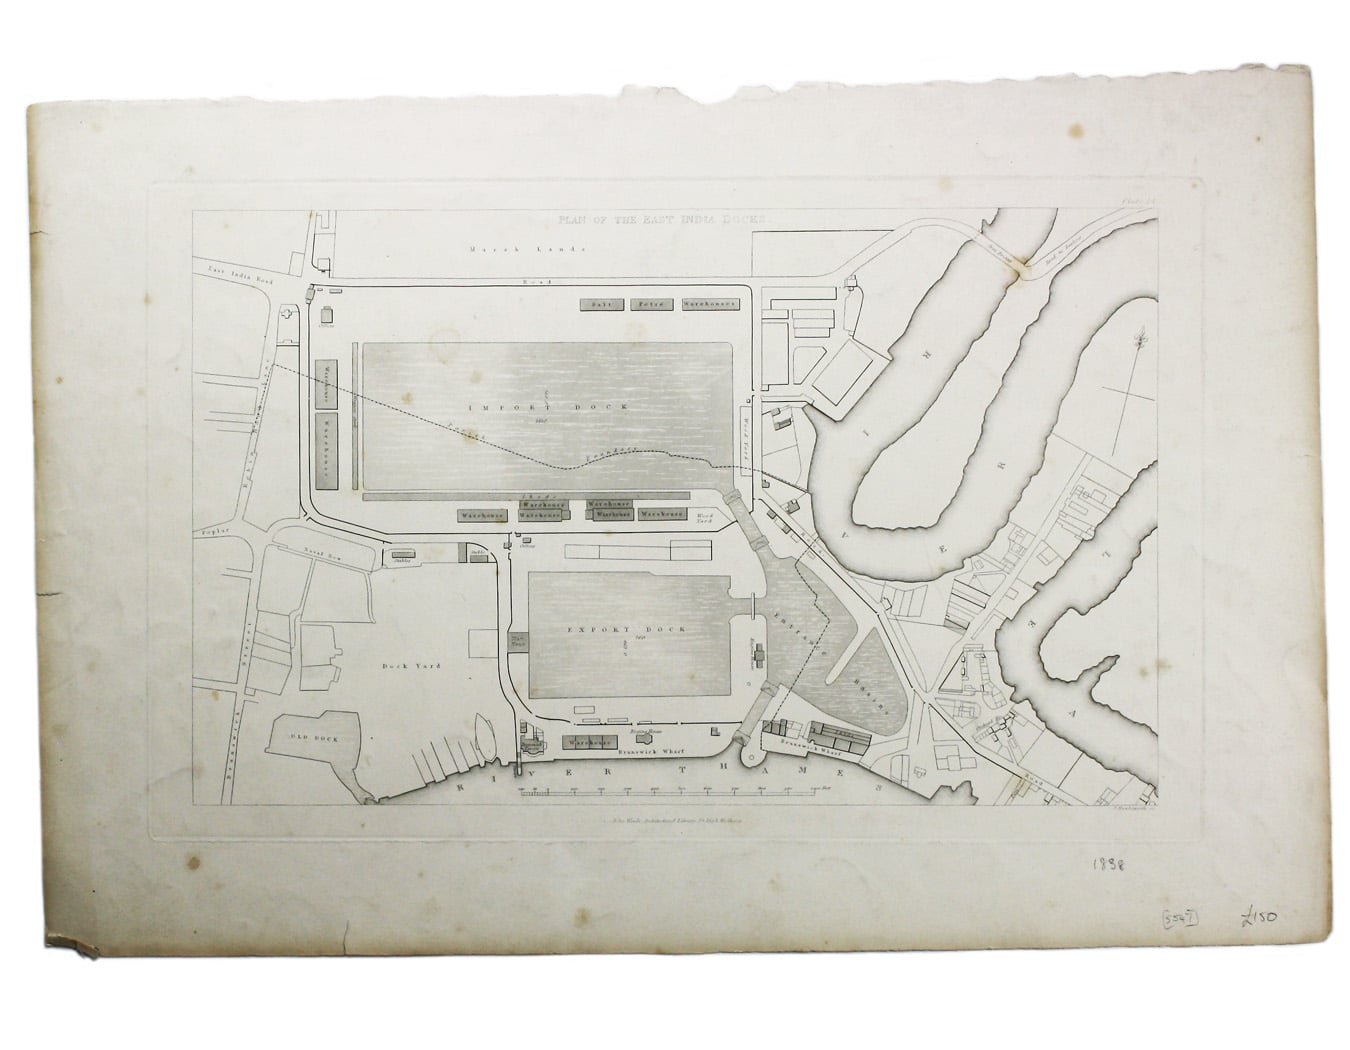 Simm’s Plan of the East India Docks